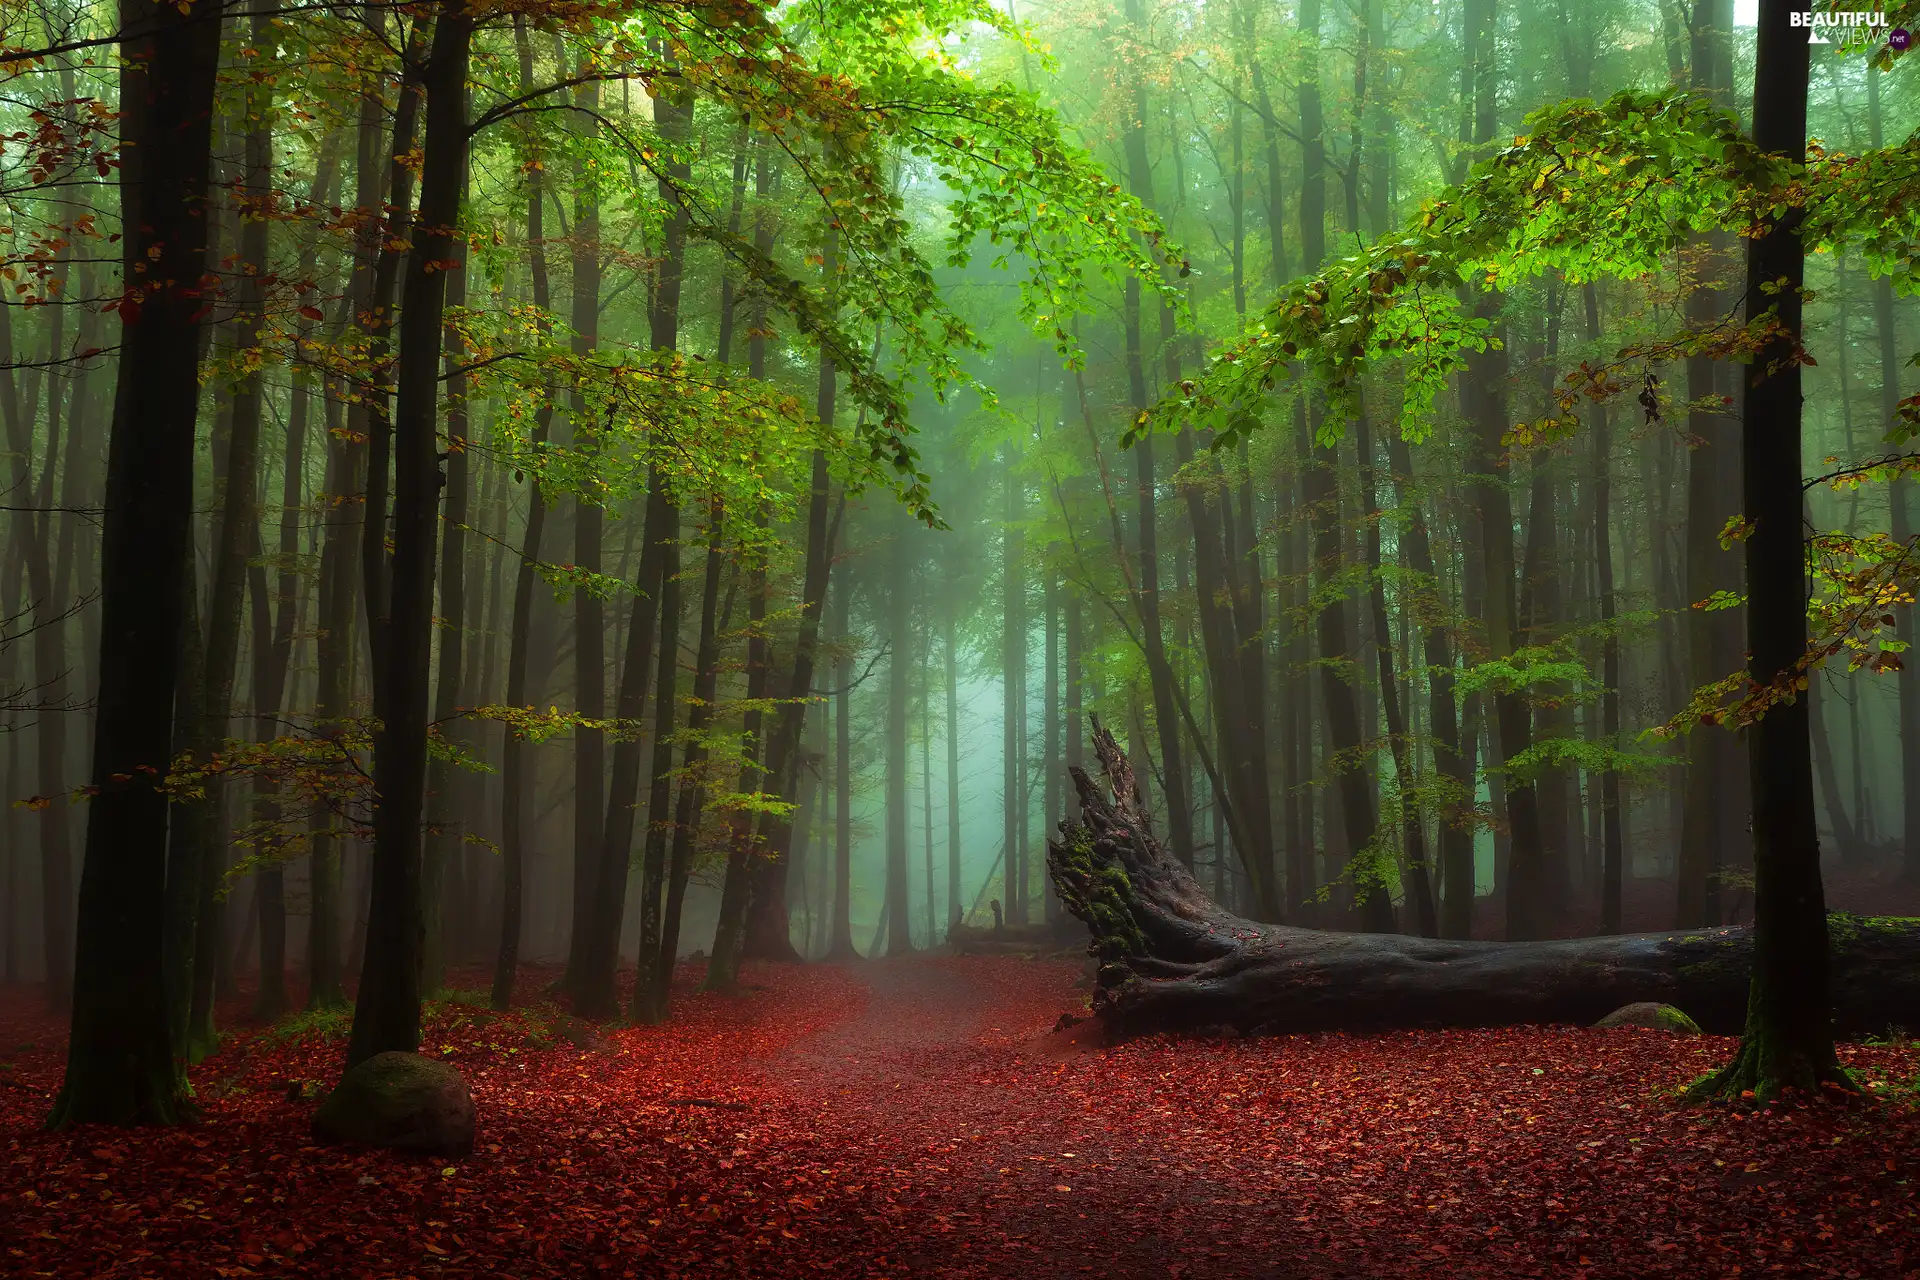 trees, viewes, trees, Way, fallen, green ones, forest, Fog